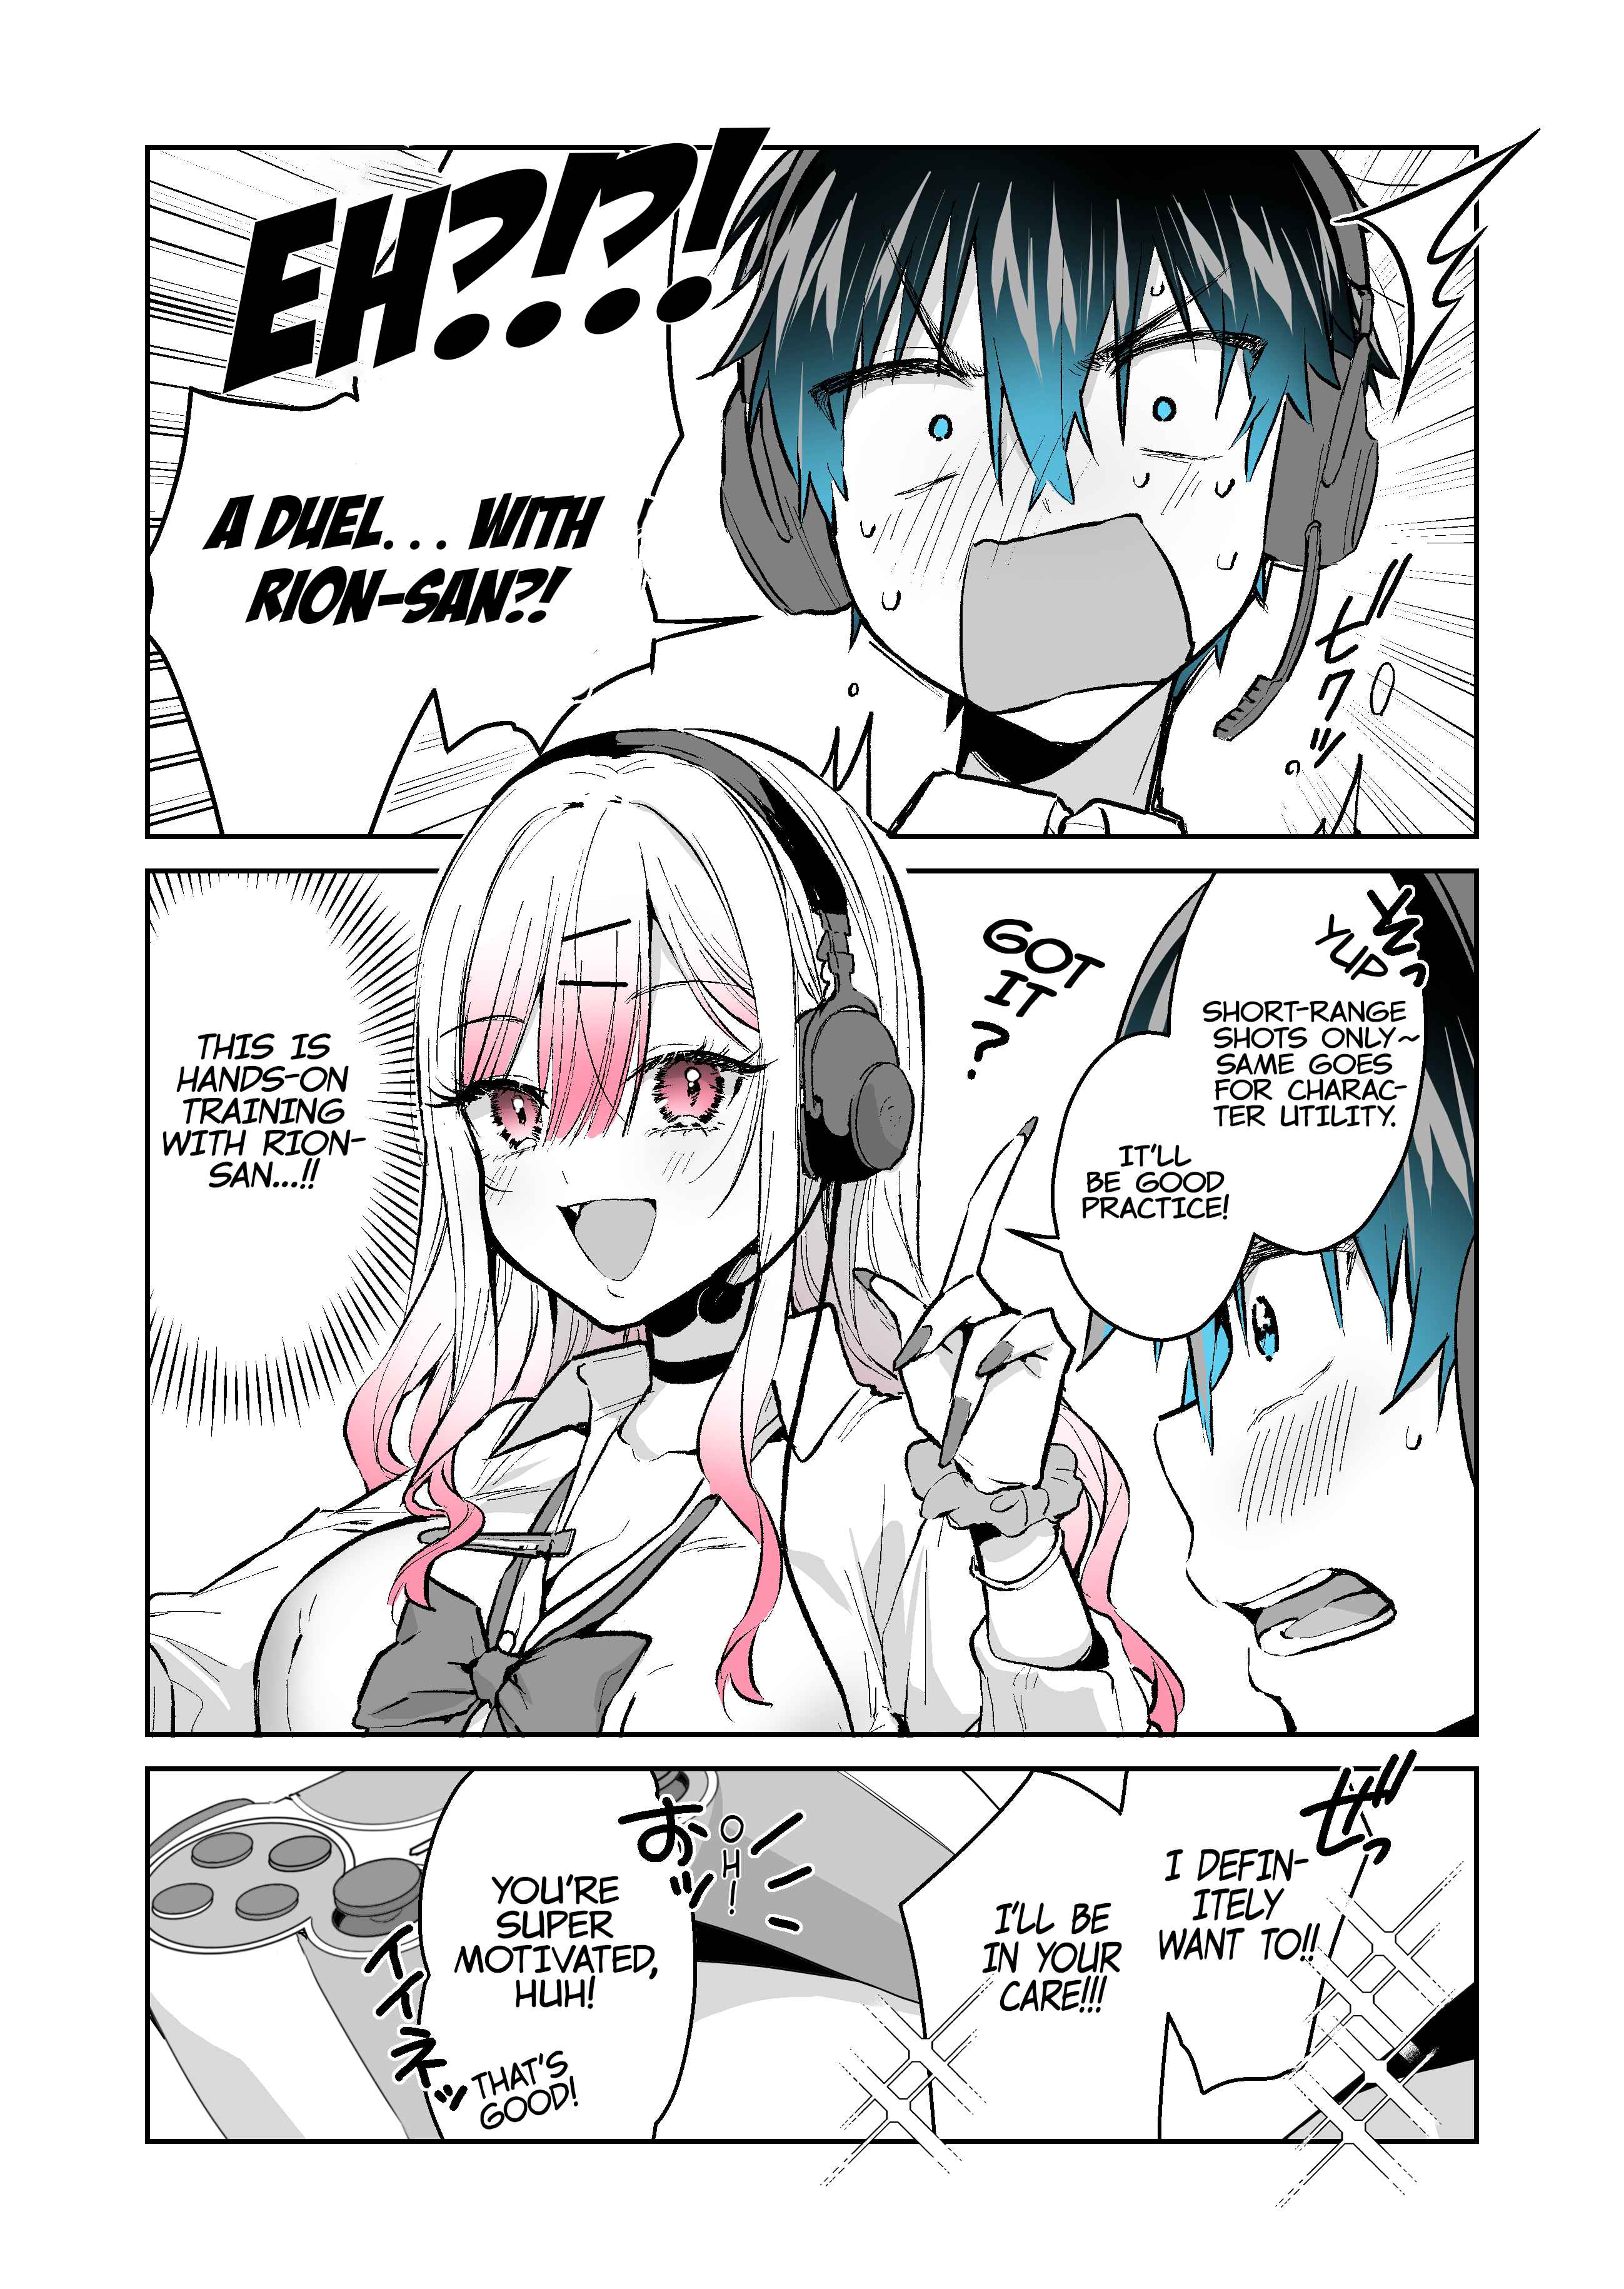 Want to Be Praised by a Gal Gamer - chapter 28 - #2